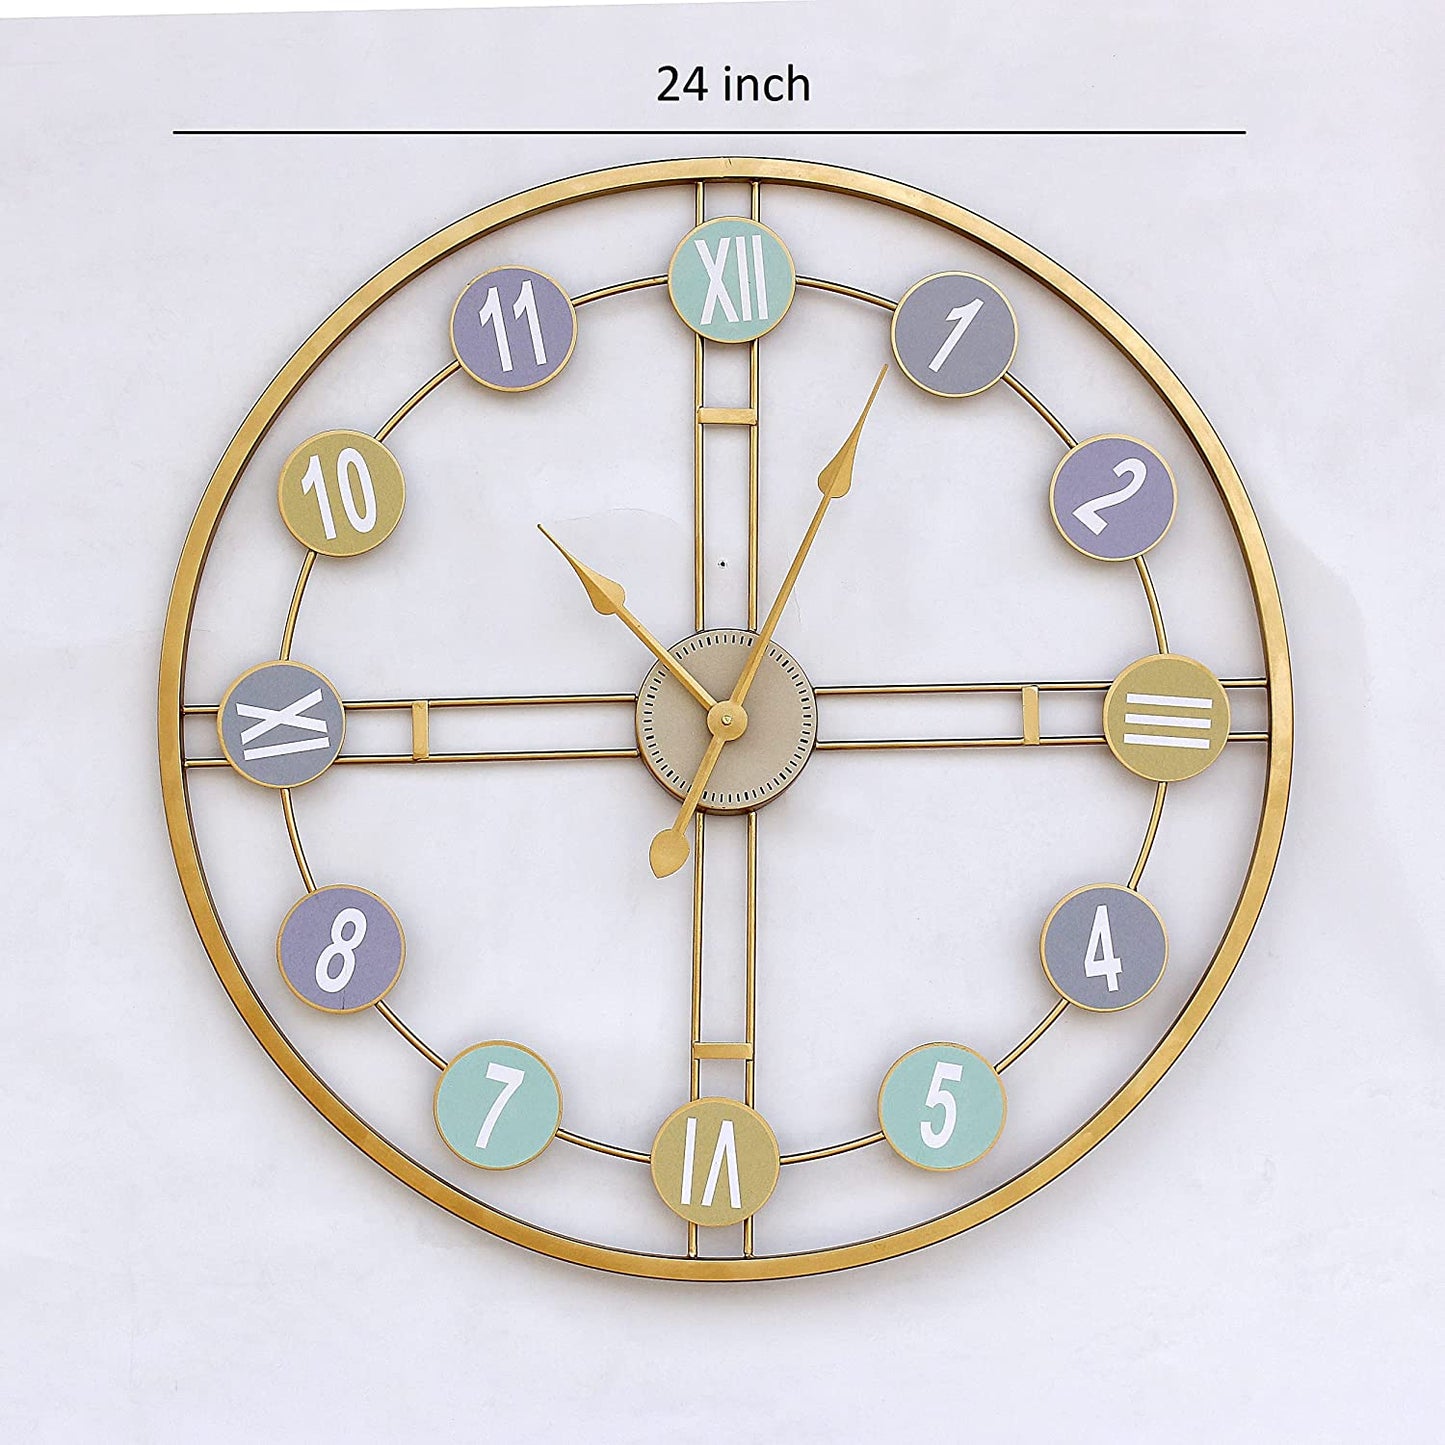 Gold Metal Wall Clock - 24 Inch, Vintage Pattern for Living Room, Bedroom, or Study